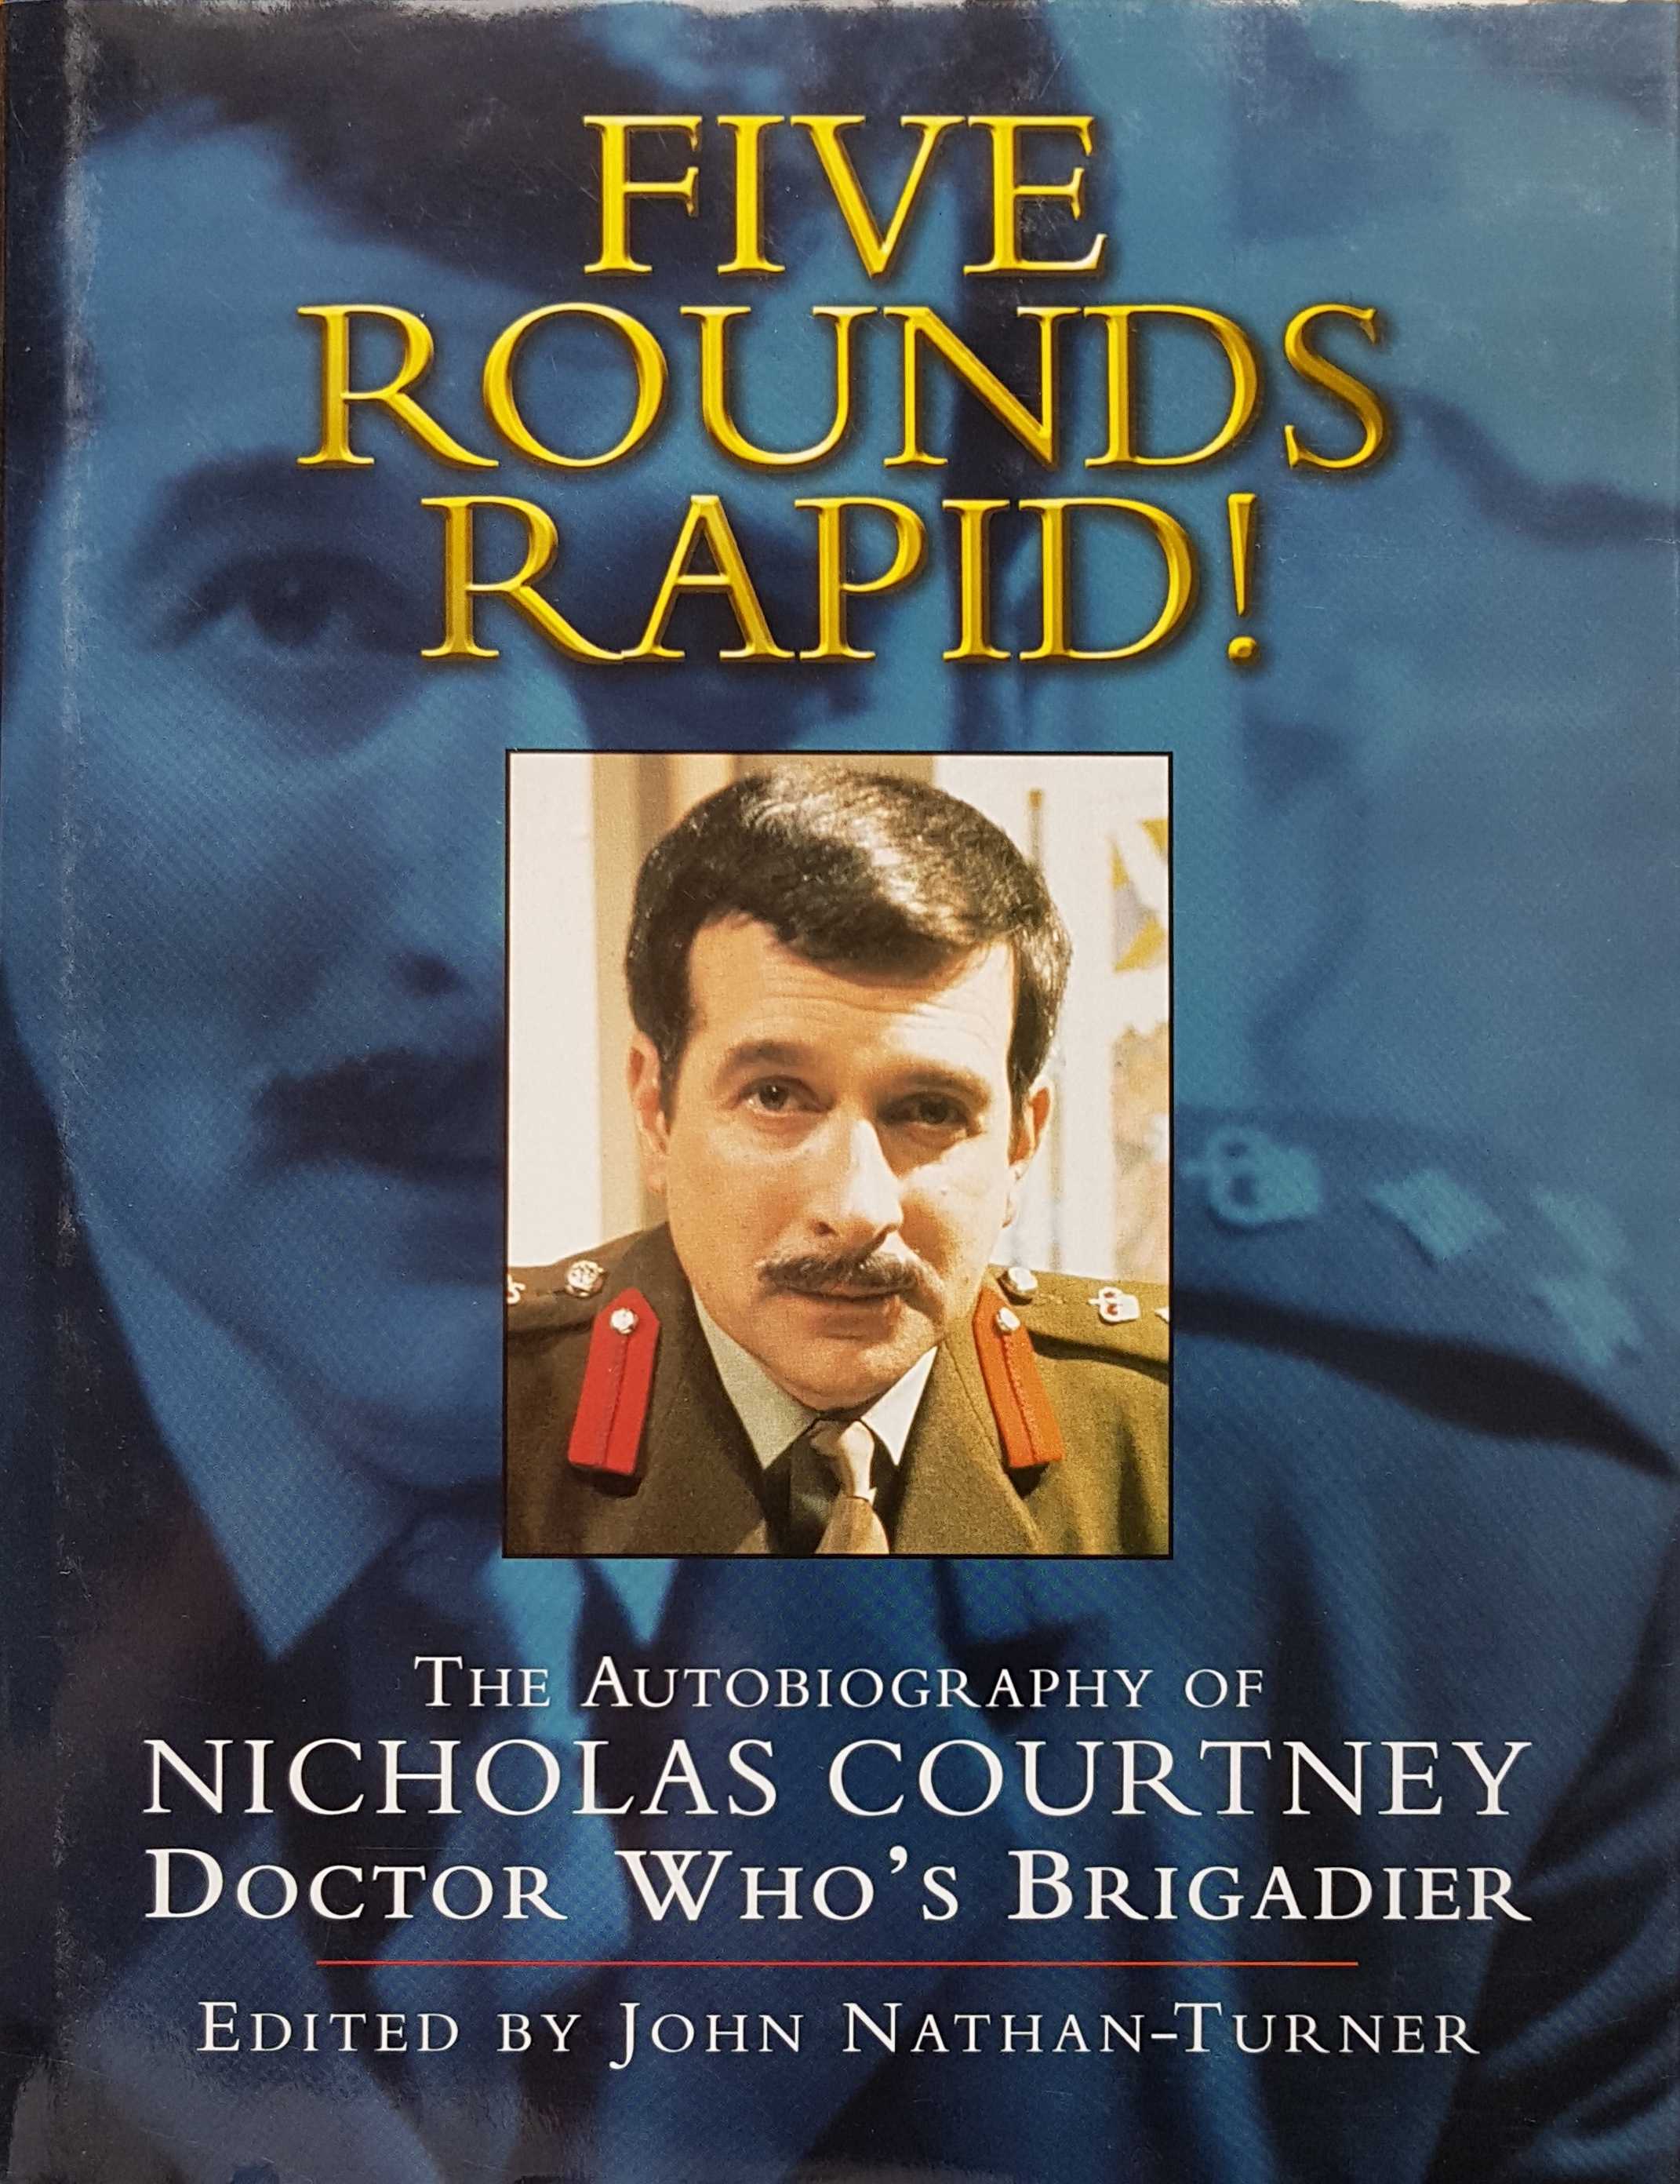 Picture of 1-85227-782-3 Five rounds rapid by artist Nicholas Courtney from the BBC records and Tapes library